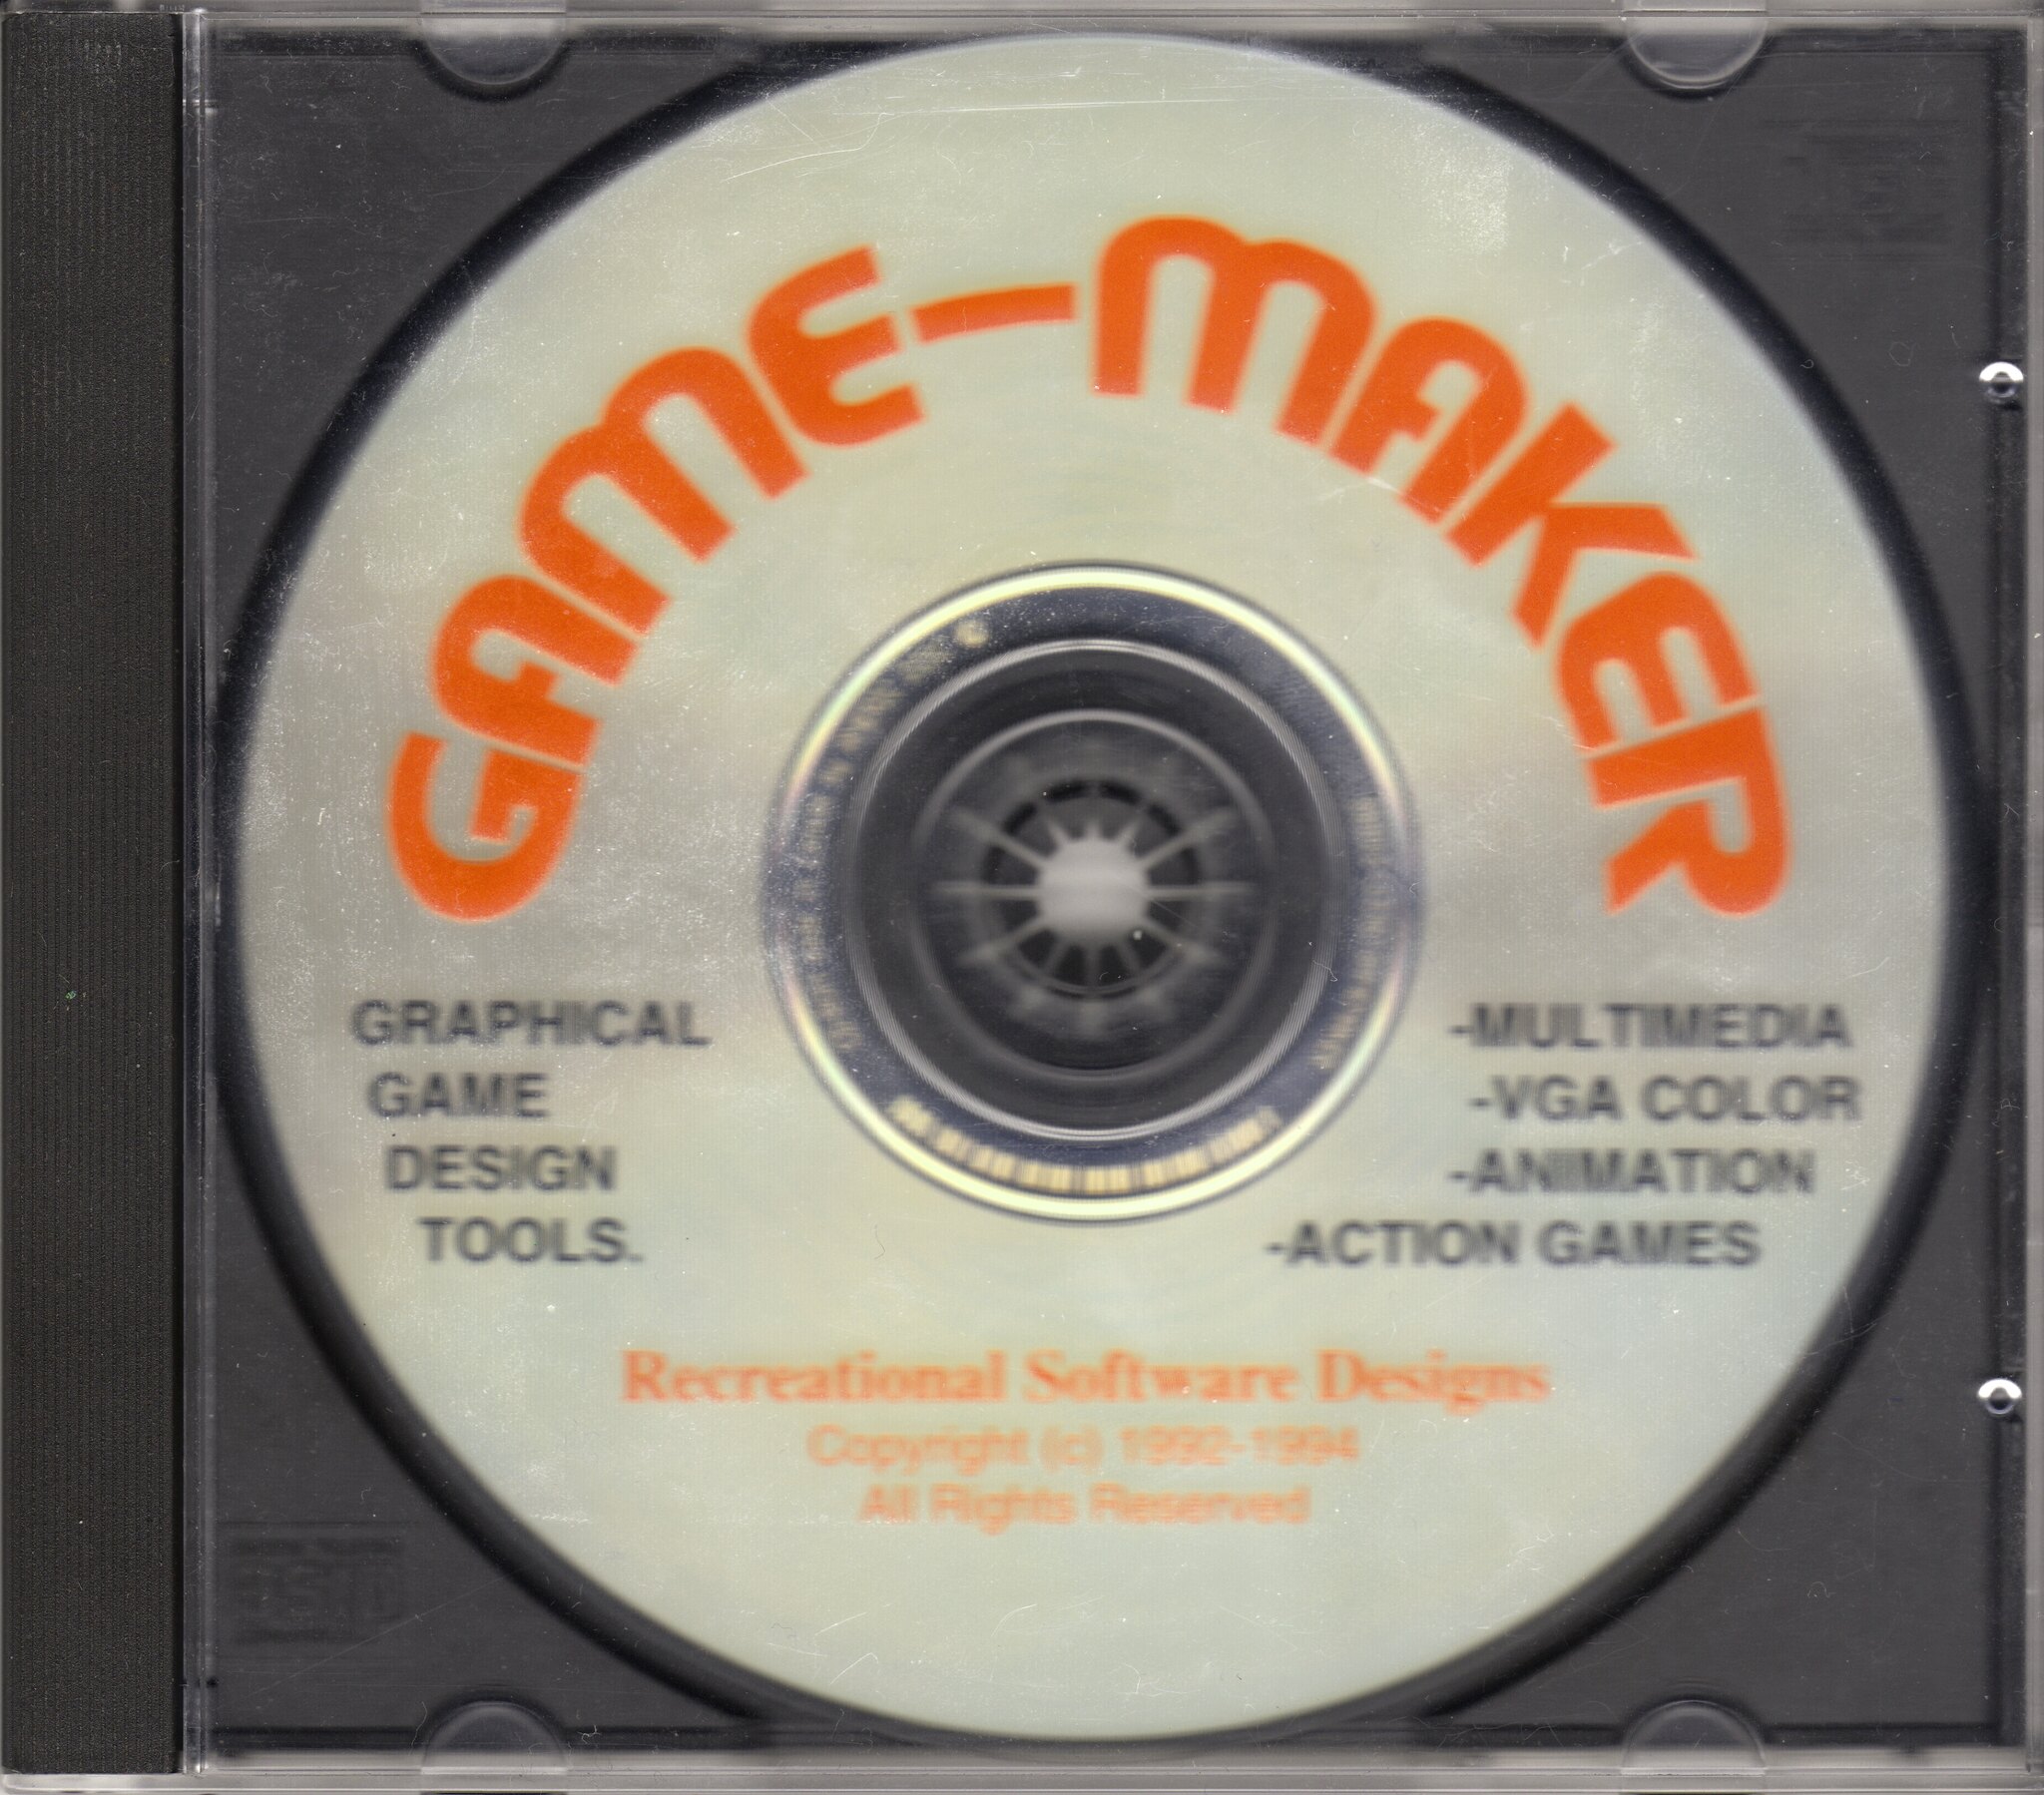 Graphical game design tools. Multimedia! VGA color! Animation! Action games!